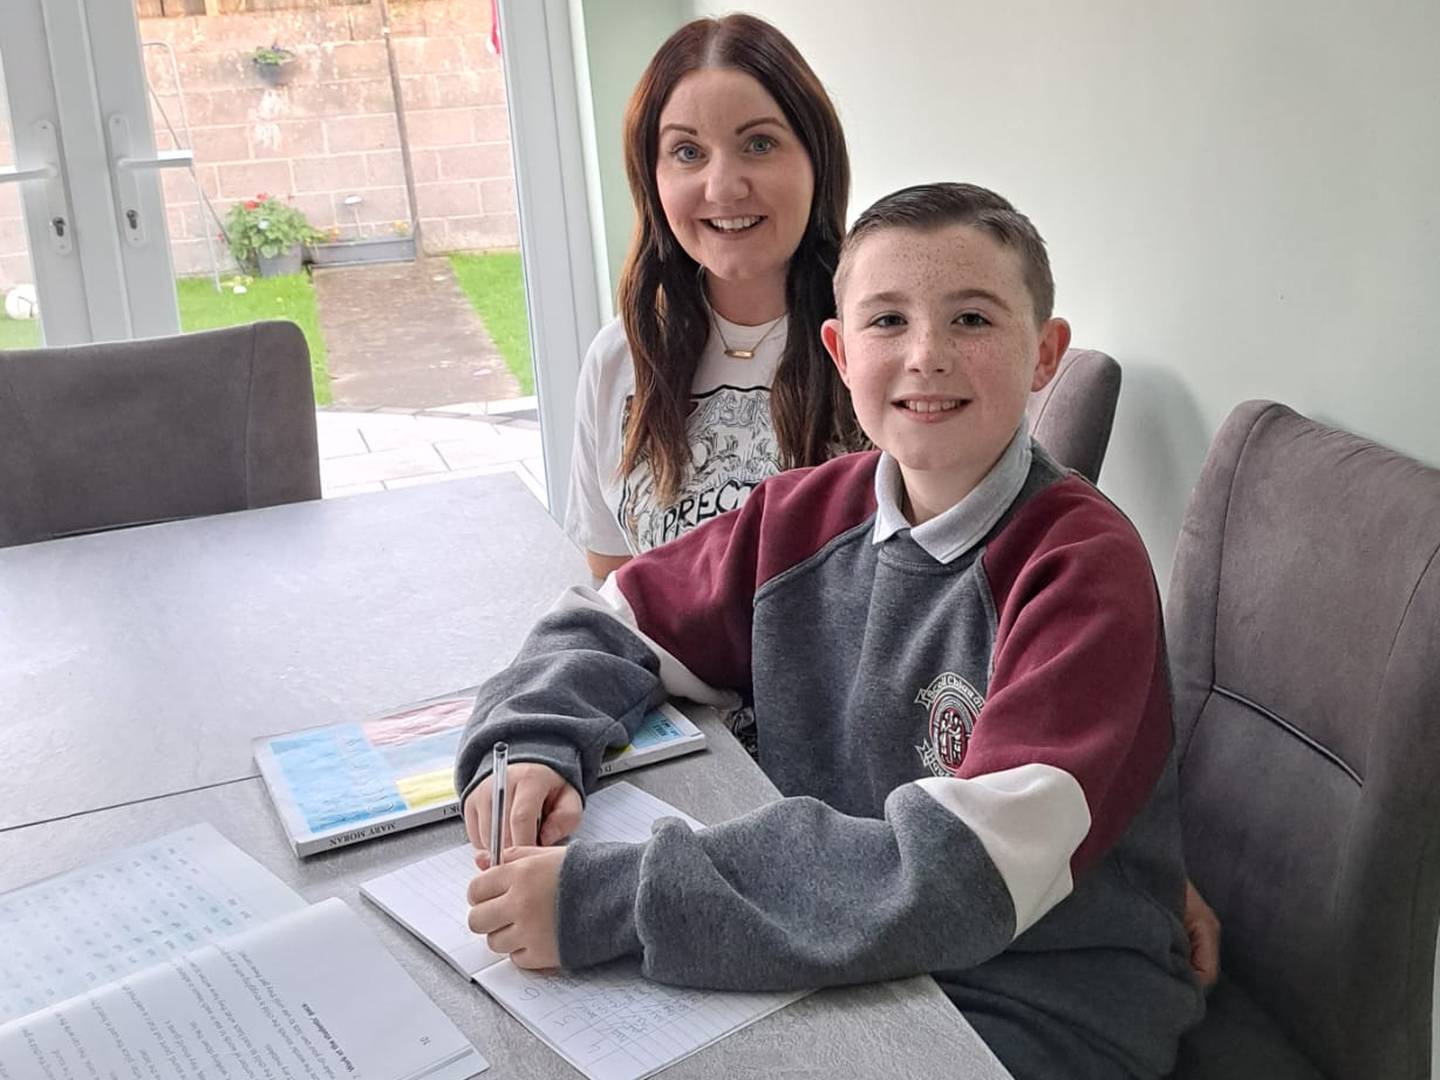 Amy Tyrell was at home with her son Jason (11).